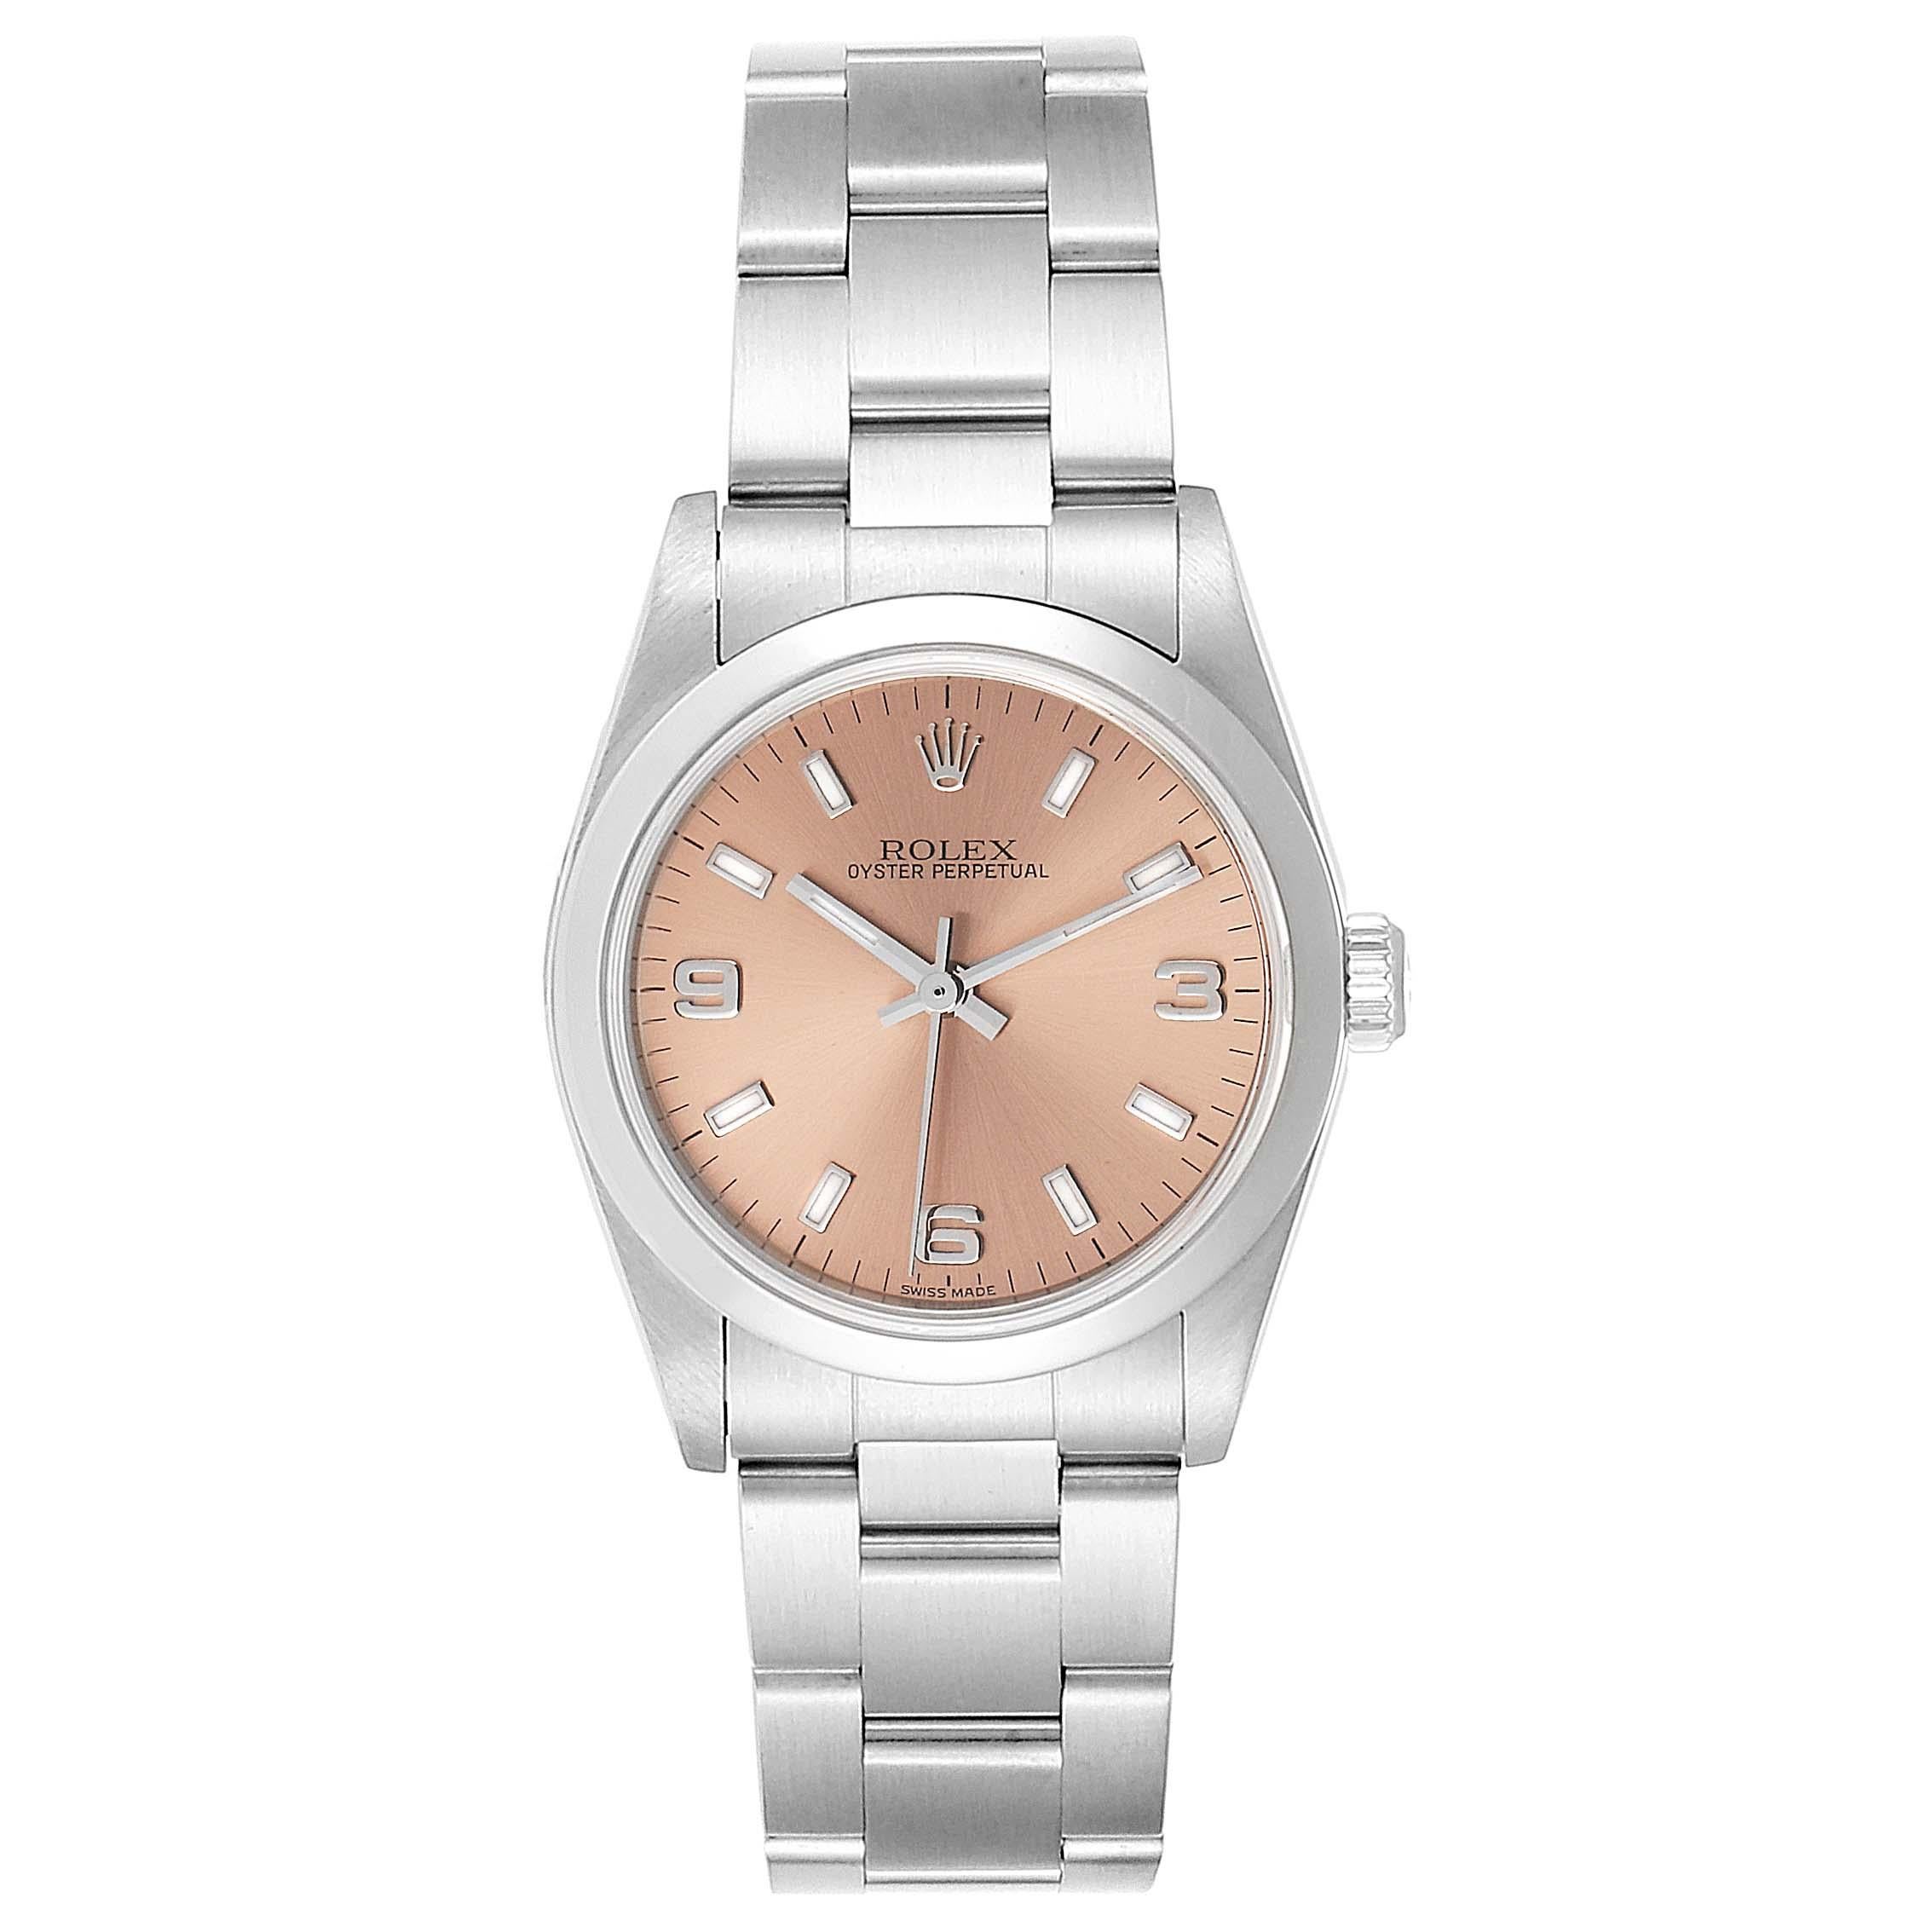 Rolex Midsize Salmon Dial Domed Bezel Steel Ladies Watch 77080. Officially certified chronometer self-winding movement. Stainless steel oyster case 31.0 mm in diameter. Rolex logo on a crown. Stainless steel smooth bezel. Scratch resistant sapphire